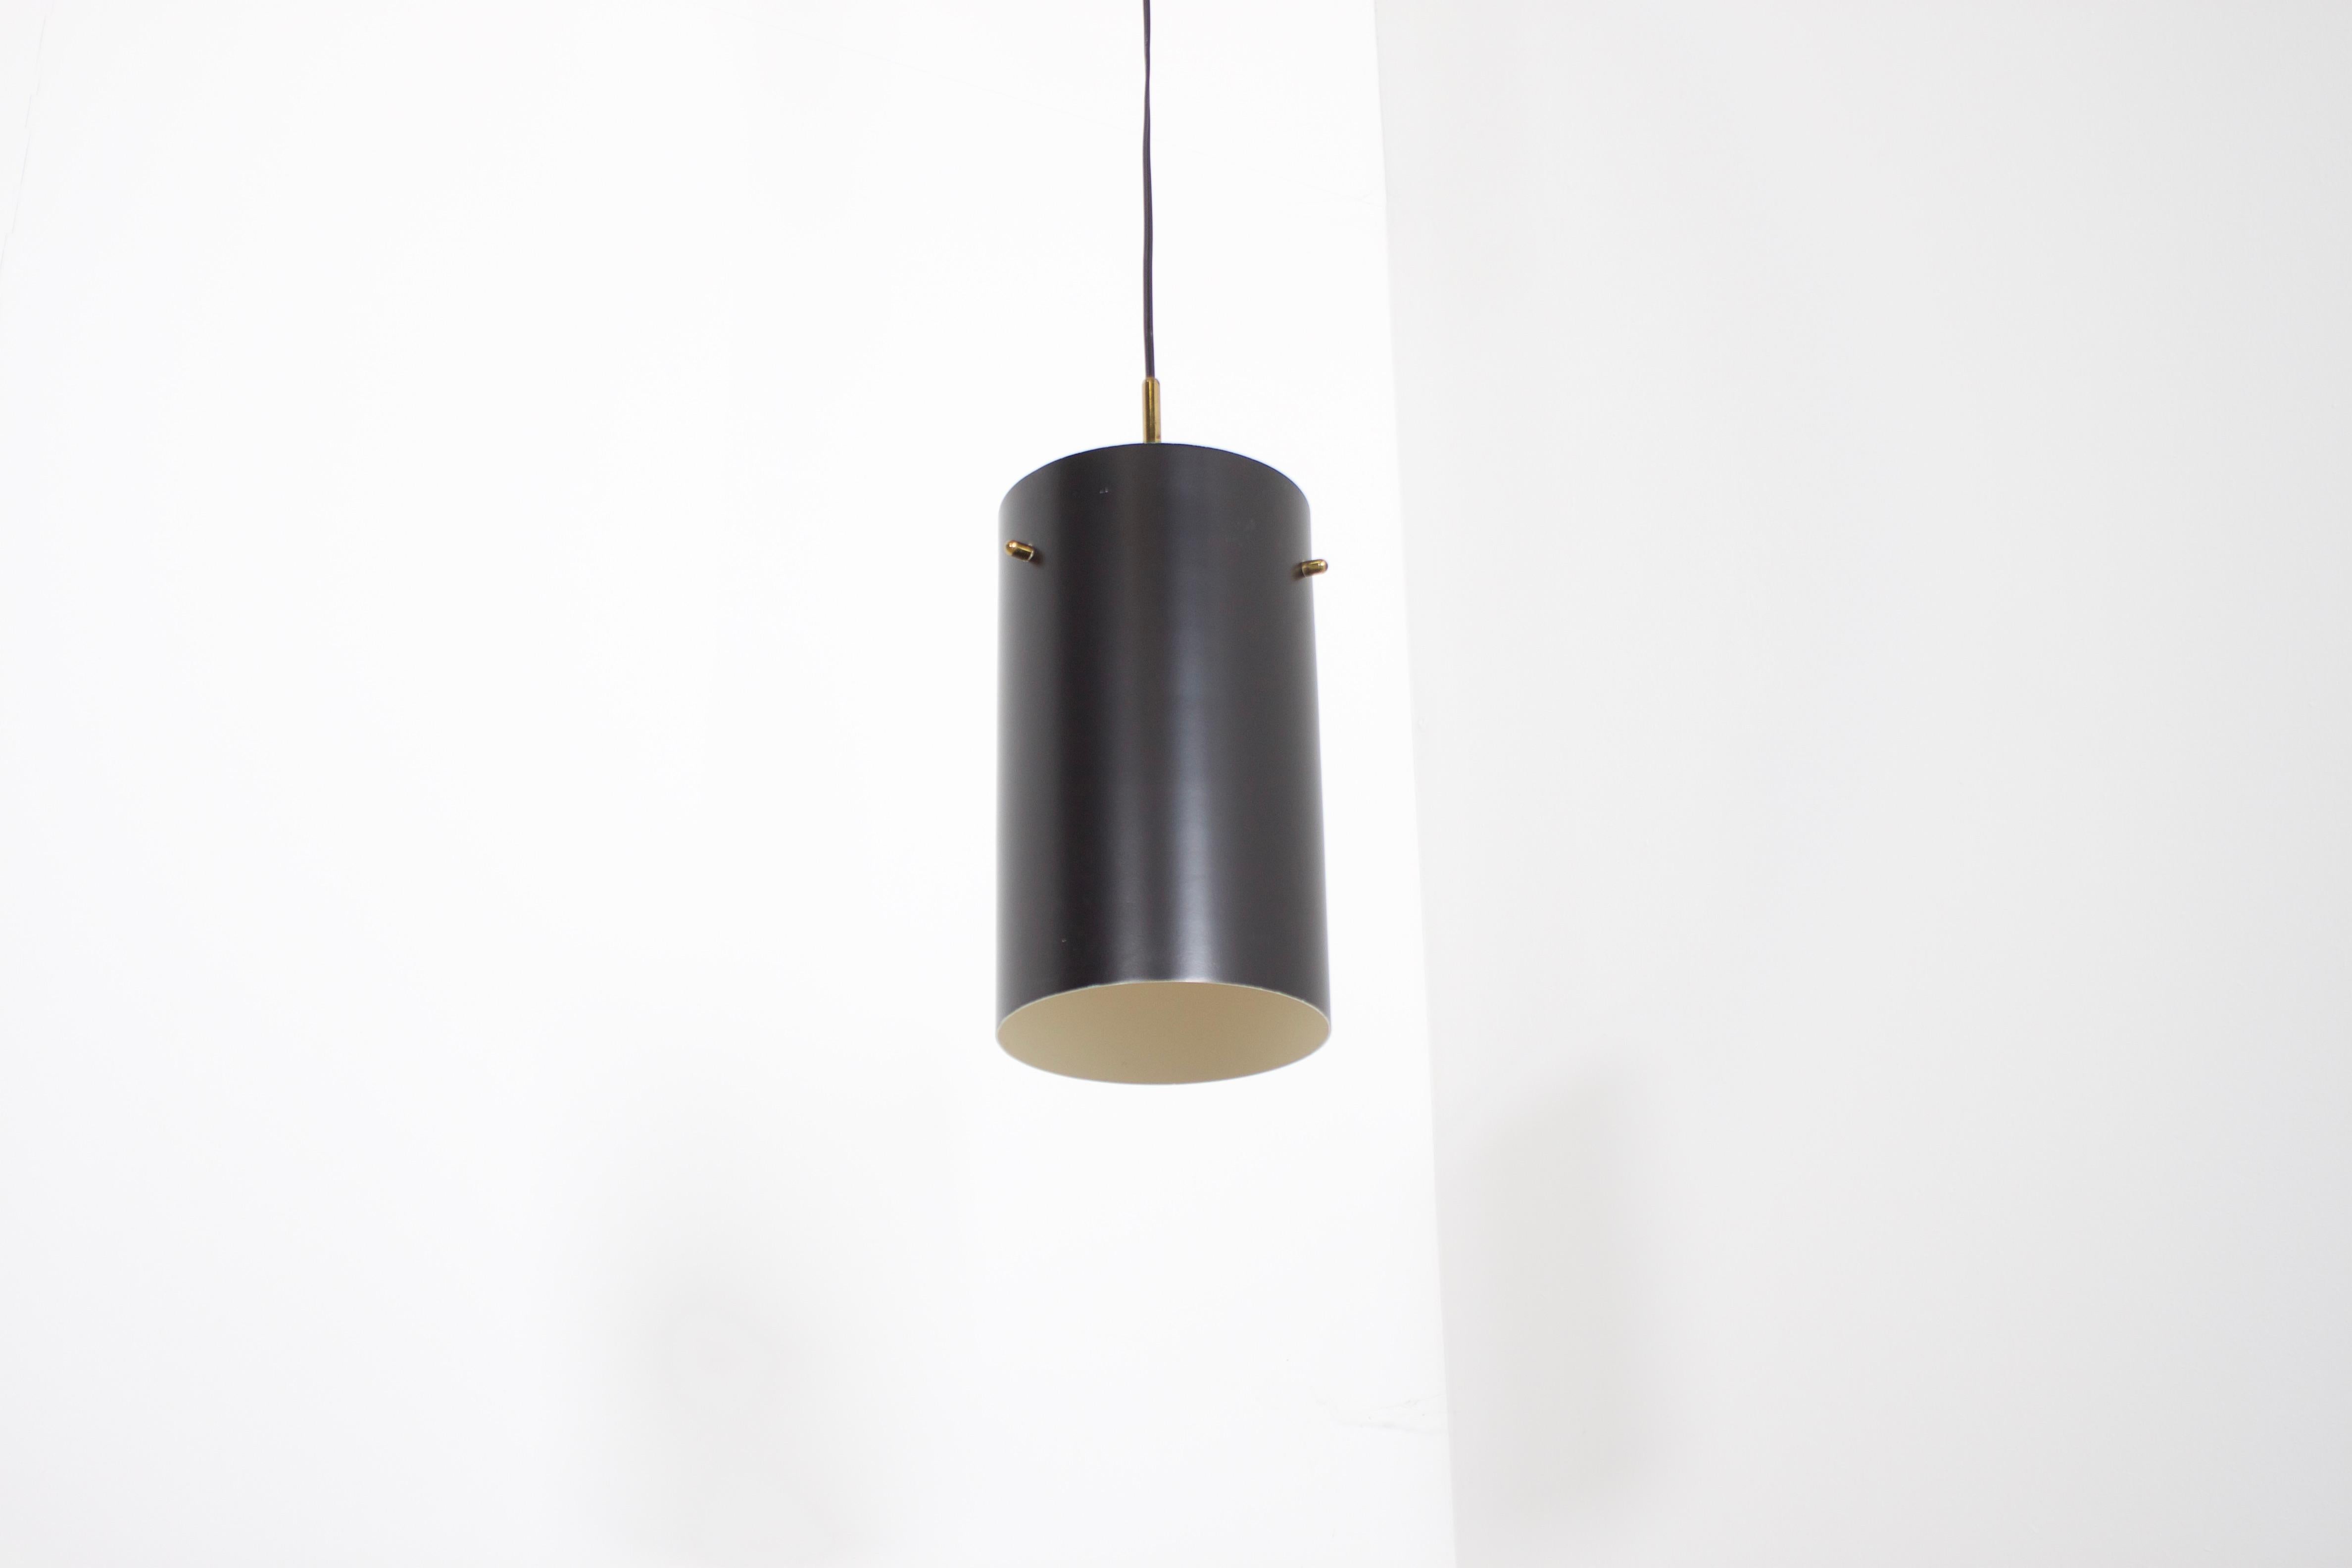 Minimalist Italian pendants in very good condition.

6 pieces available. 

Manufactured by Stilnovo in the 1950s. 

Executed in brass and black lacquered metal.

The cylindrical metal shade hangs on a frame with solid brass rods.

Original